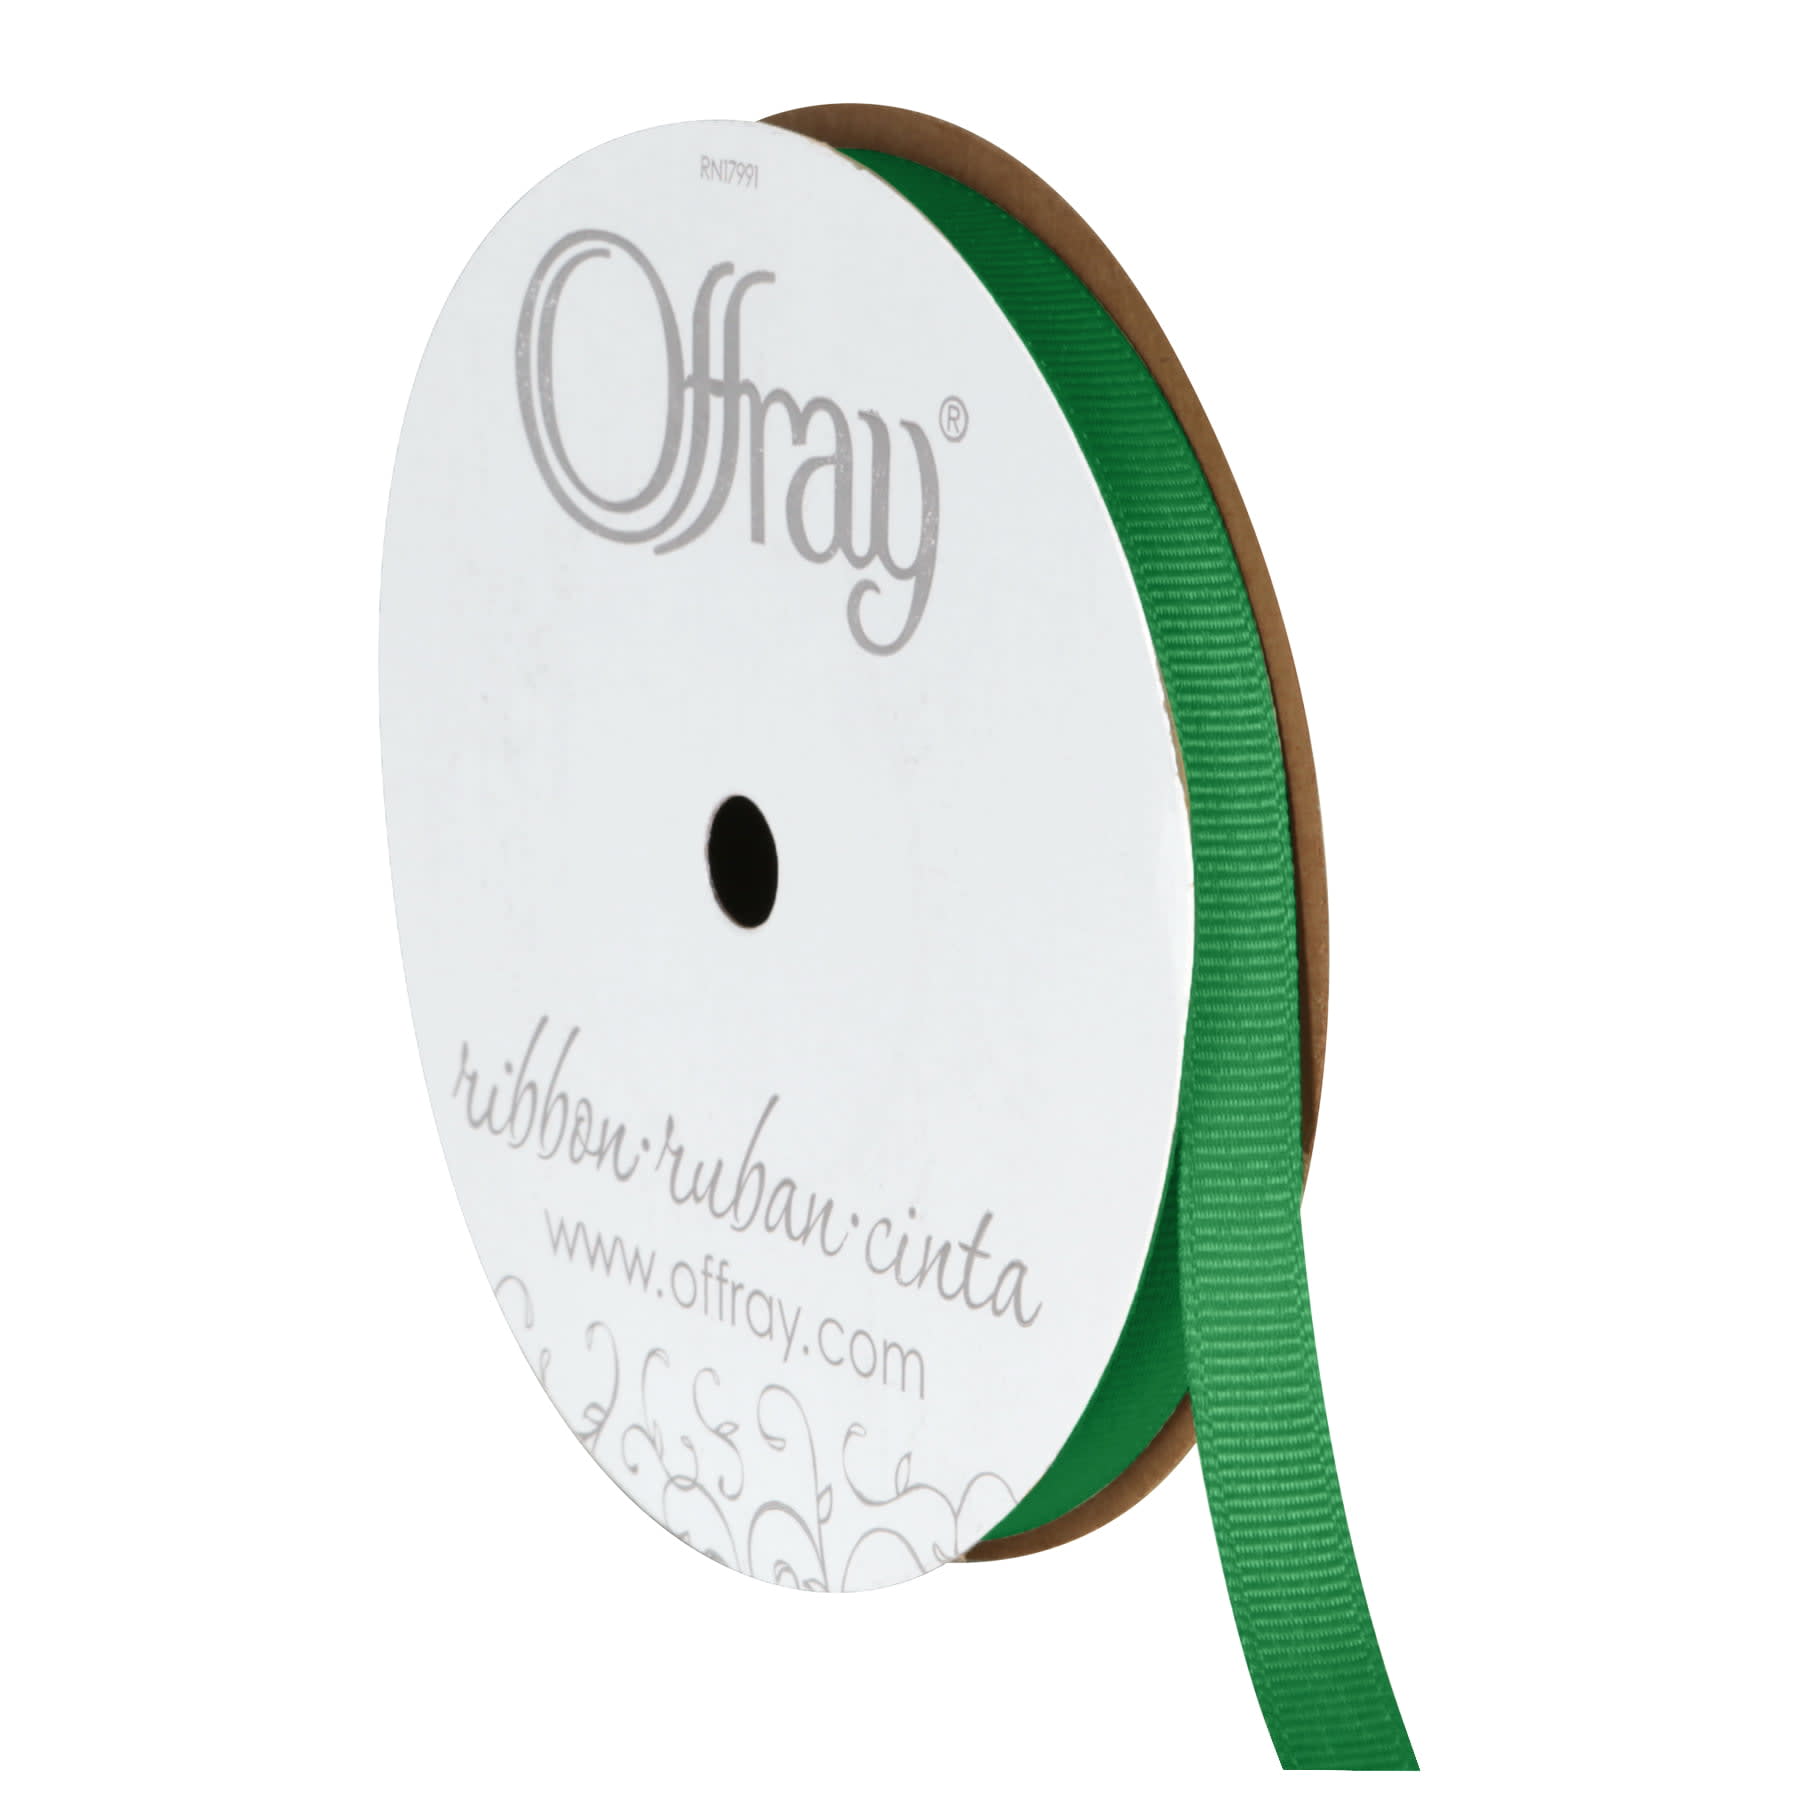 Offray Ribbon, Metallic Gold 1 1/2 inch Wired Edge Metallic Ribbon, 9 feet  - DroneUp Delivery